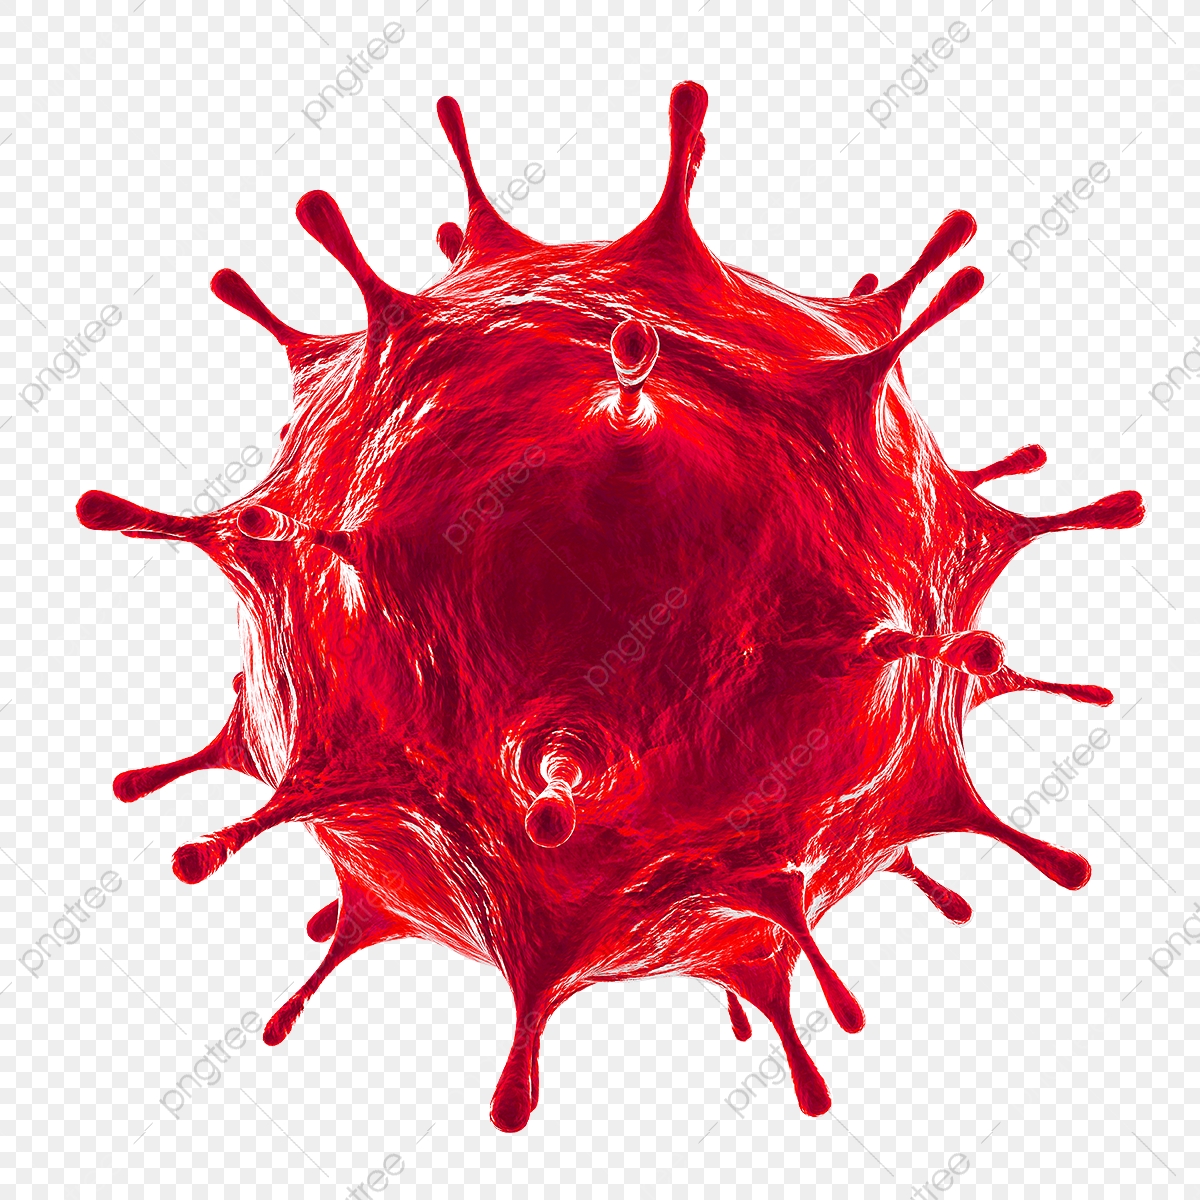 Red Covid 19 Bacteria Isolated On Transparent Background 3d Rendering Of Virus For Coronavirus Awareness